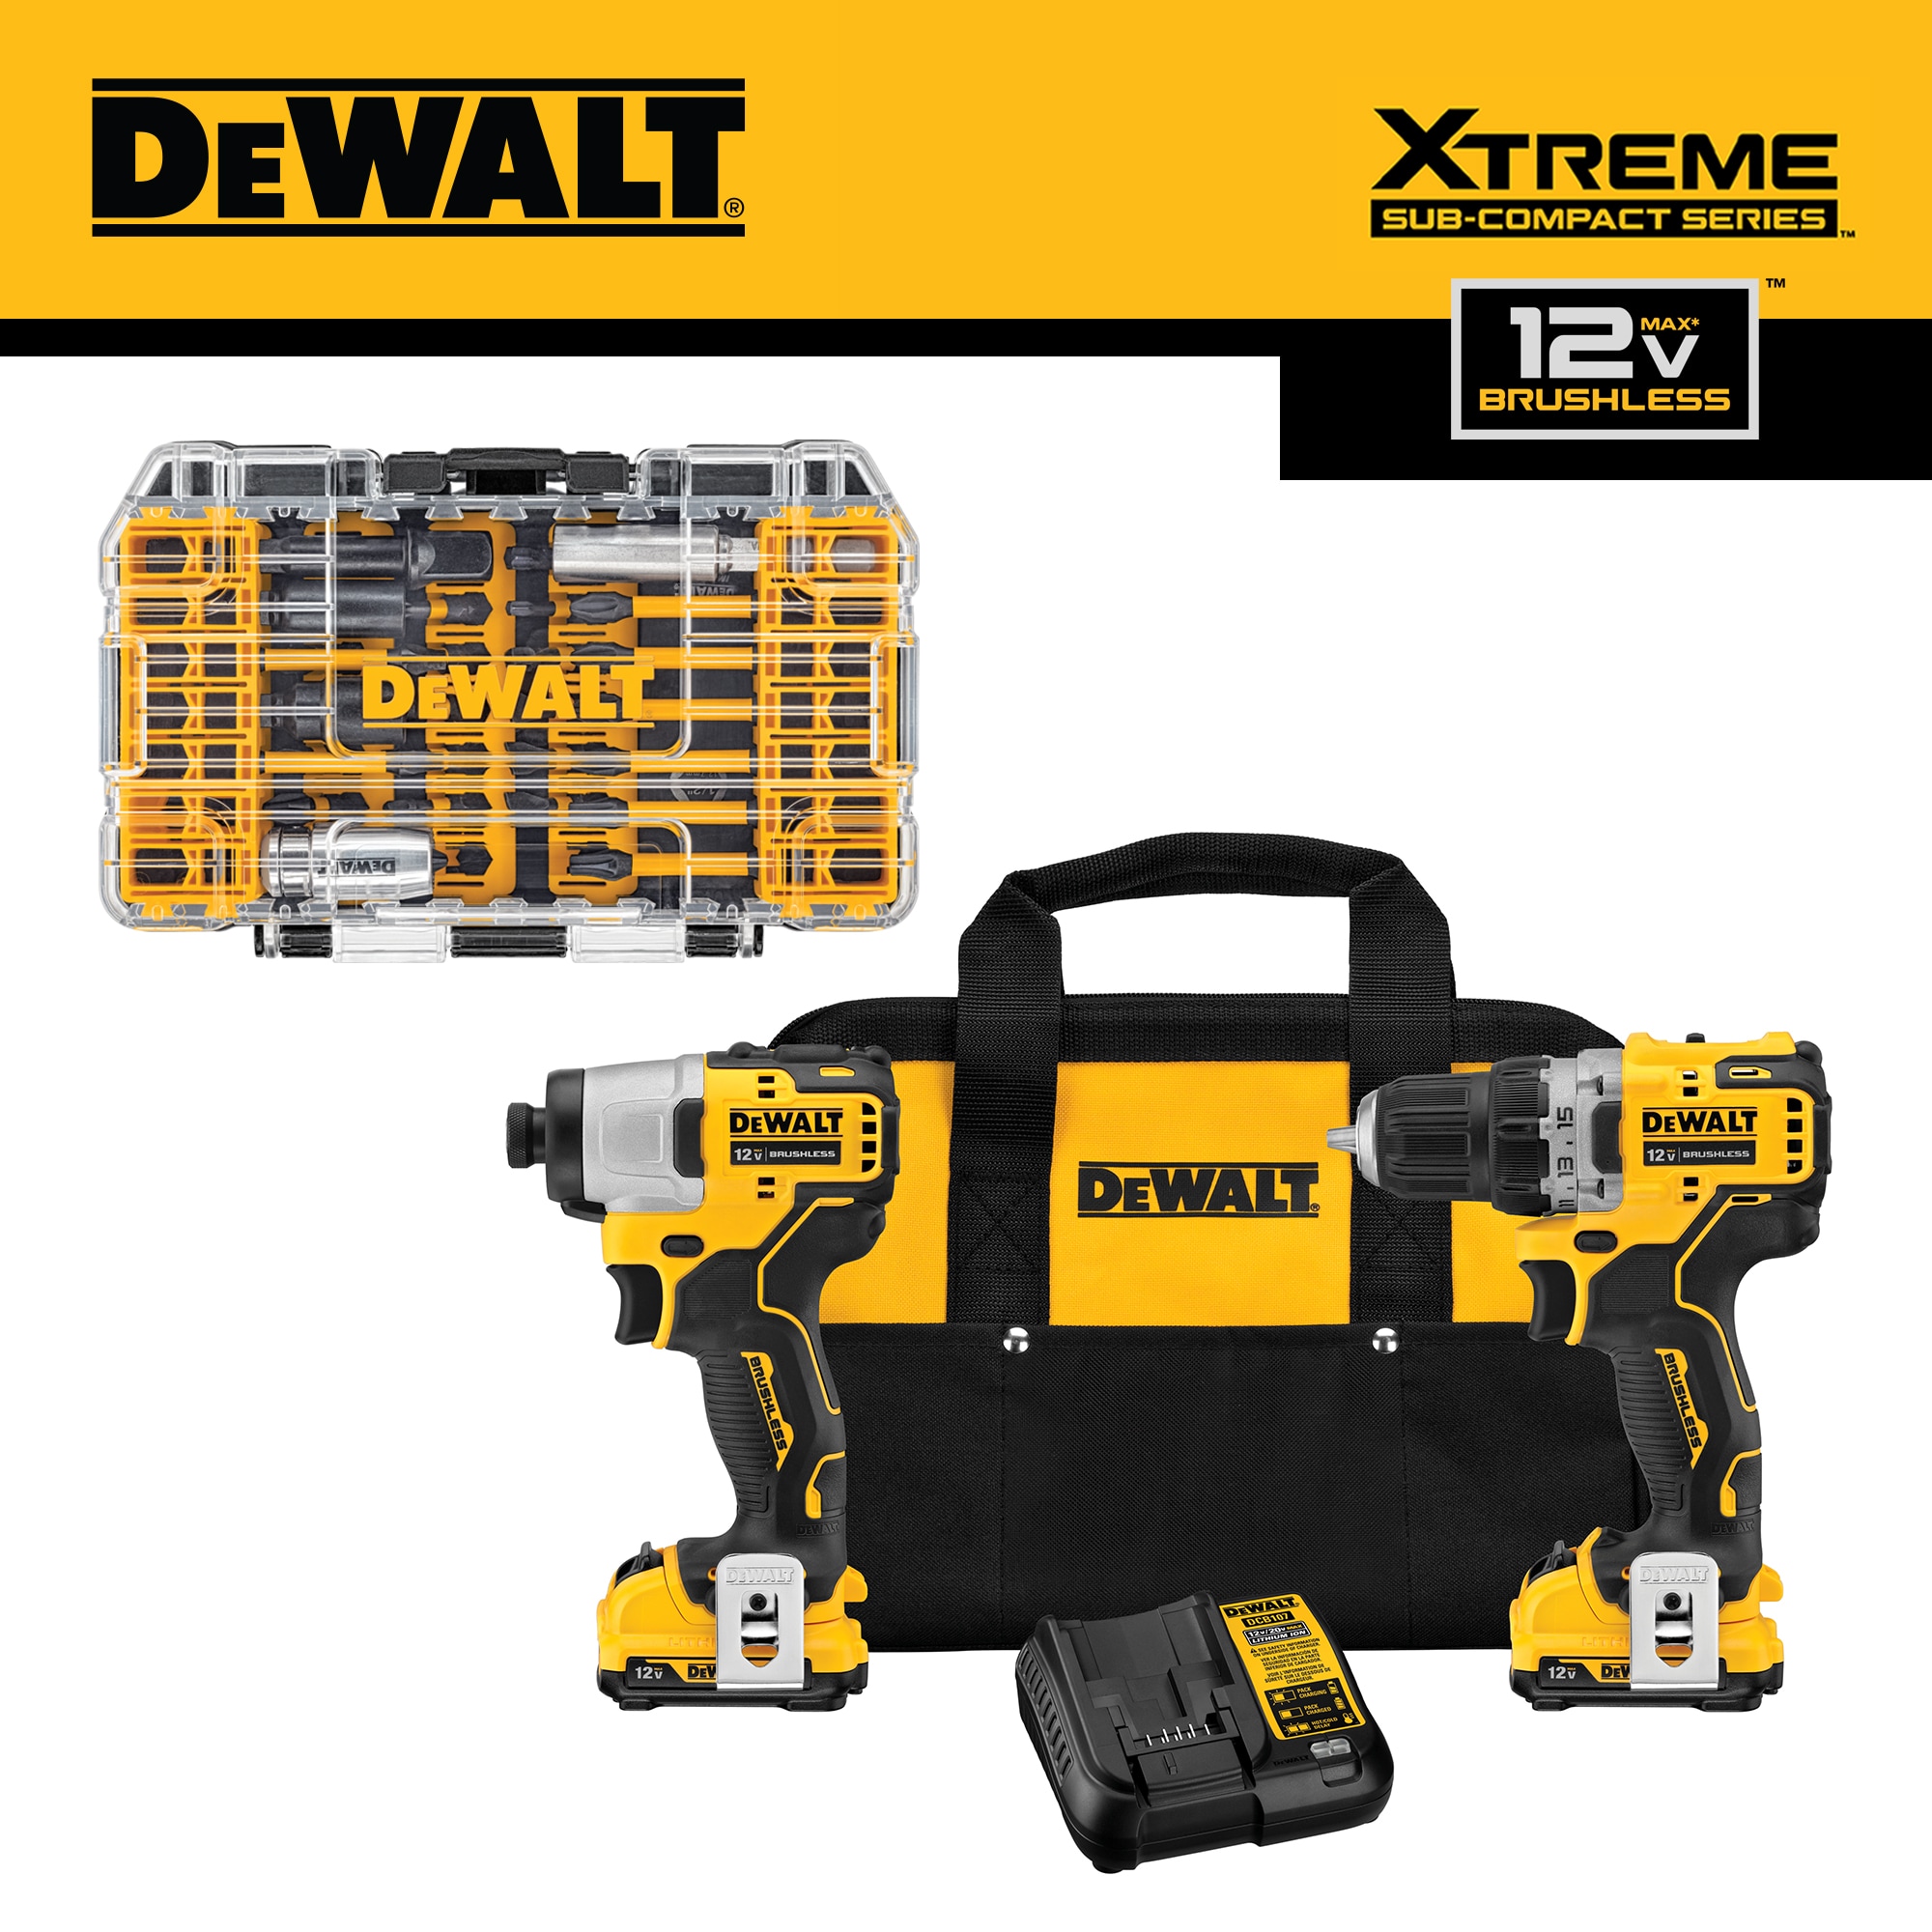 DEWALT XTREME 2-Tool 12-Volt Max Brushless Power Tool Combo Kit with Soft Case (2-Batteries and charger Included) & FlexTorq 40-Piece 1/4-in Impact